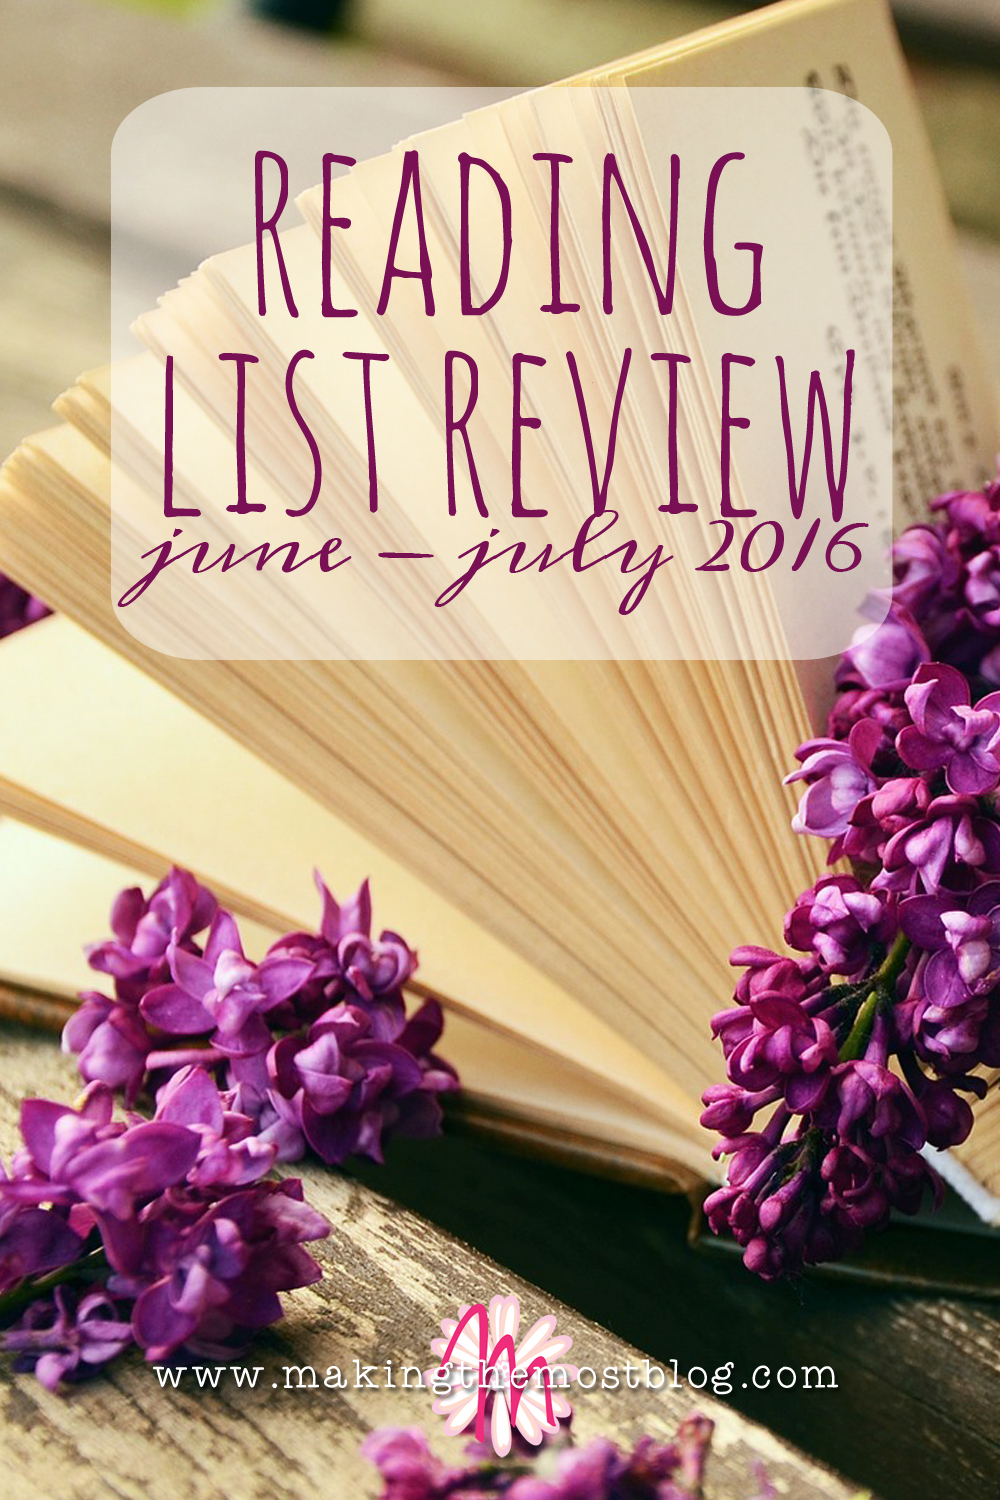 Reading List Review: June-July 2016 | Making the Most Blog